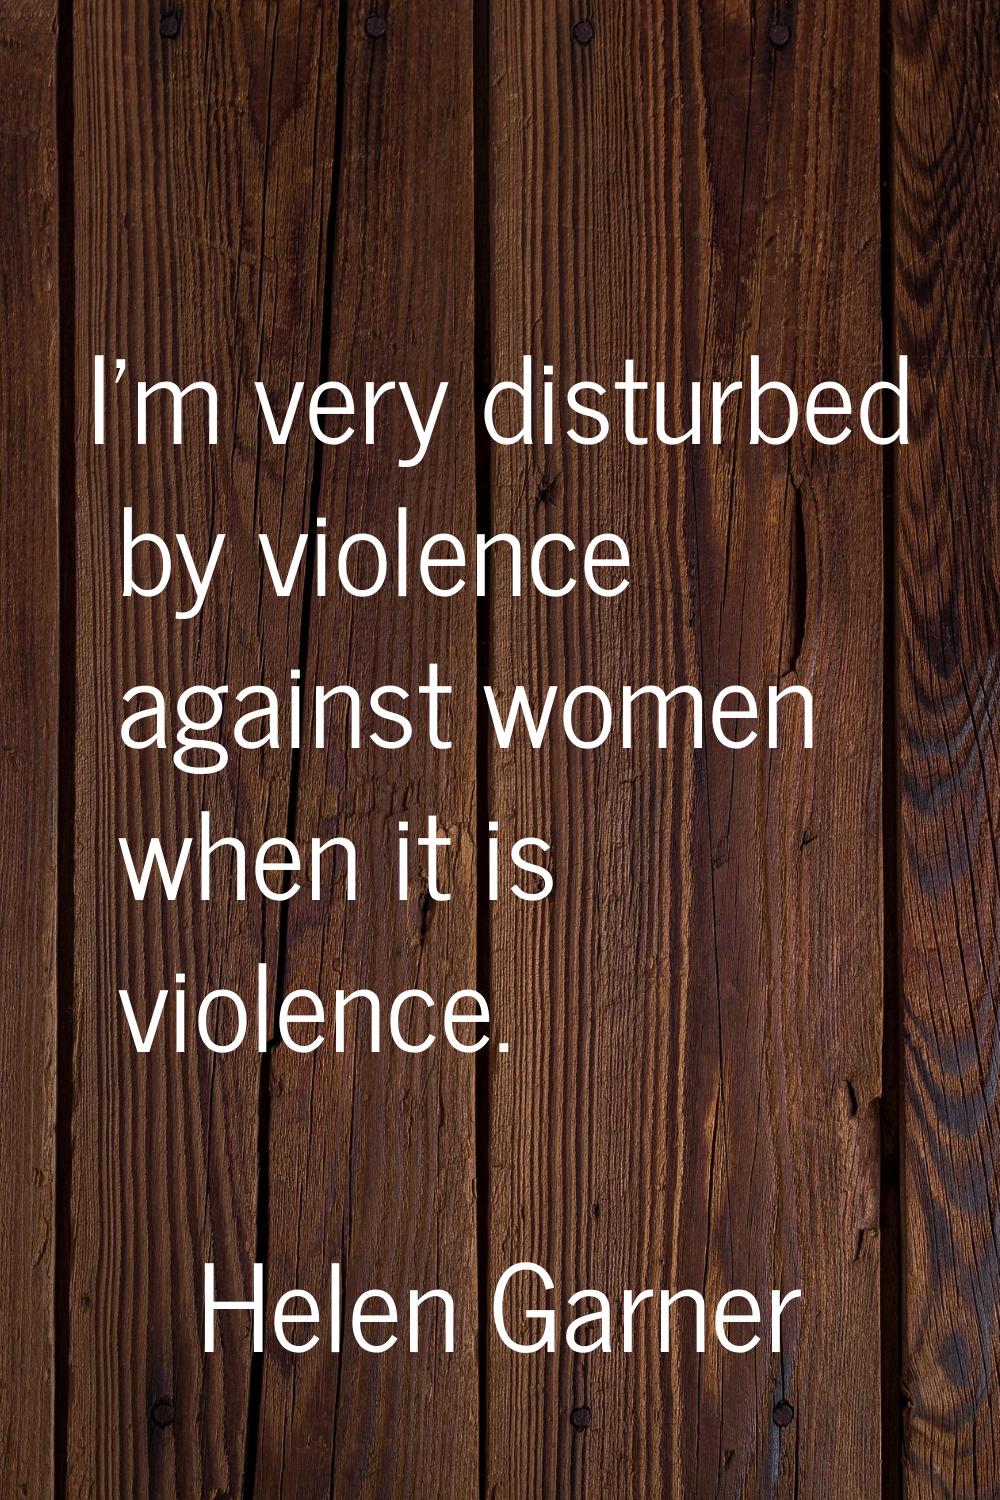 I'm very disturbed by violence against women when it is violence.